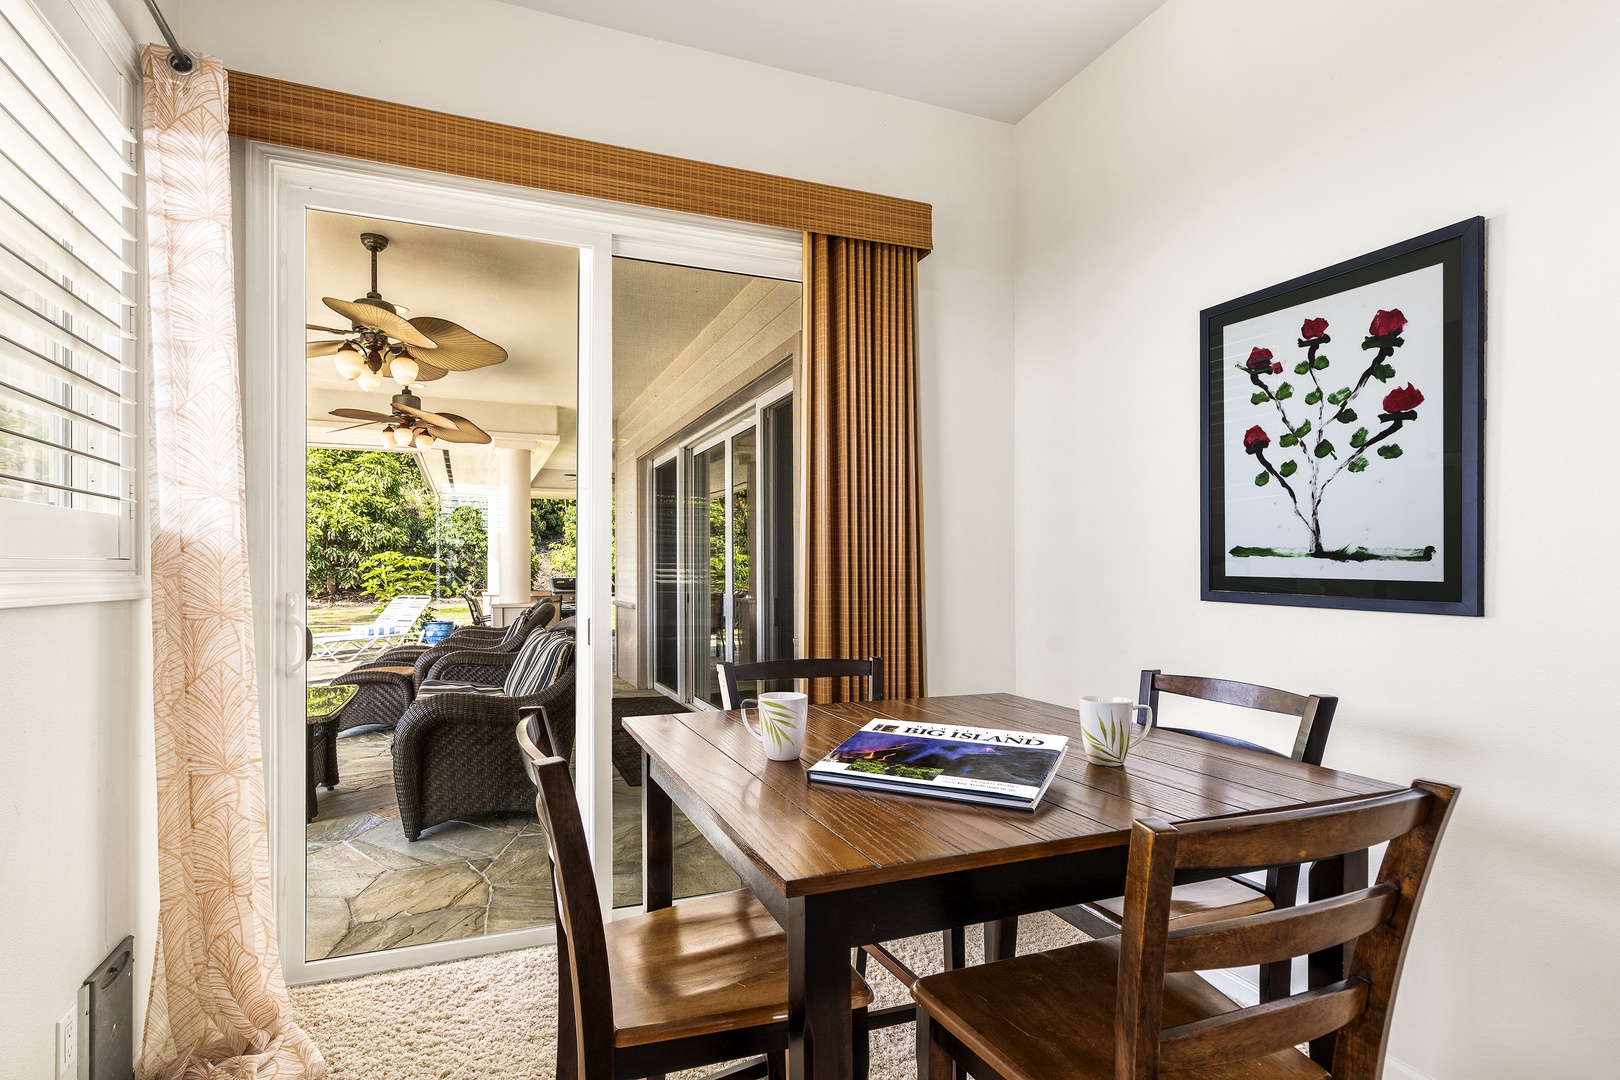 Kailua Kona Vacation Rentals, Piko Nani - Seating area with Lanai access in the primary bedroom